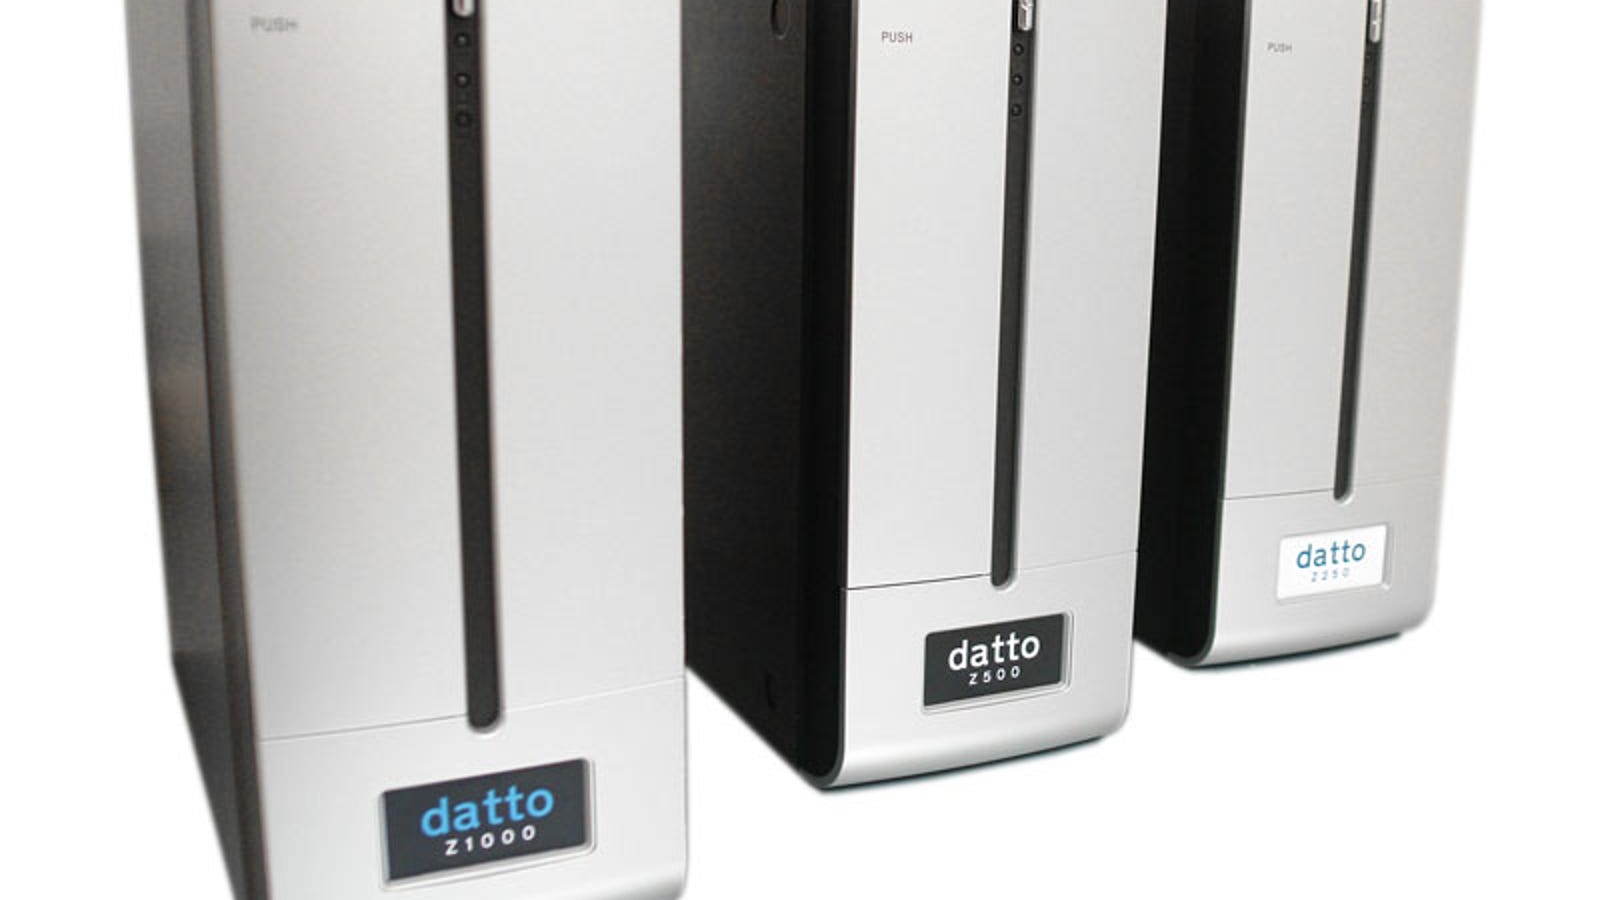 Datto's ZR Series Drive Improves Internet Backup Solution With Gigabit Ethernet, RAID and ZFS